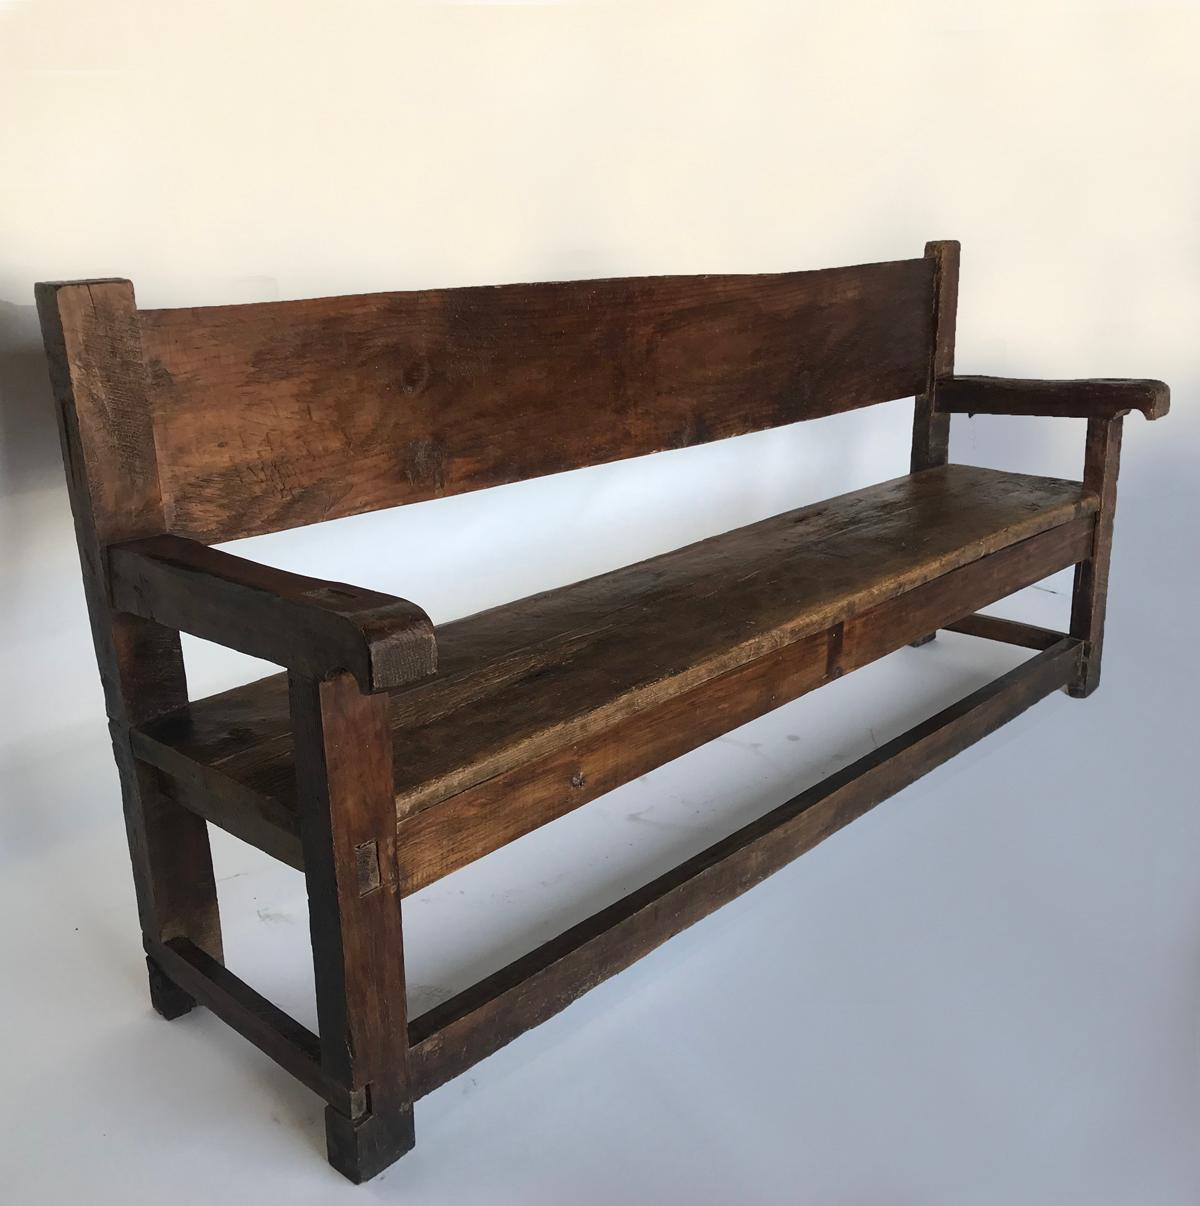 Great looking vintage Chajul bench from the highlands of Guatemala. Open back. Rustic and solid! Wonderful patina throughout. There are carved initials, AT, in the seat.